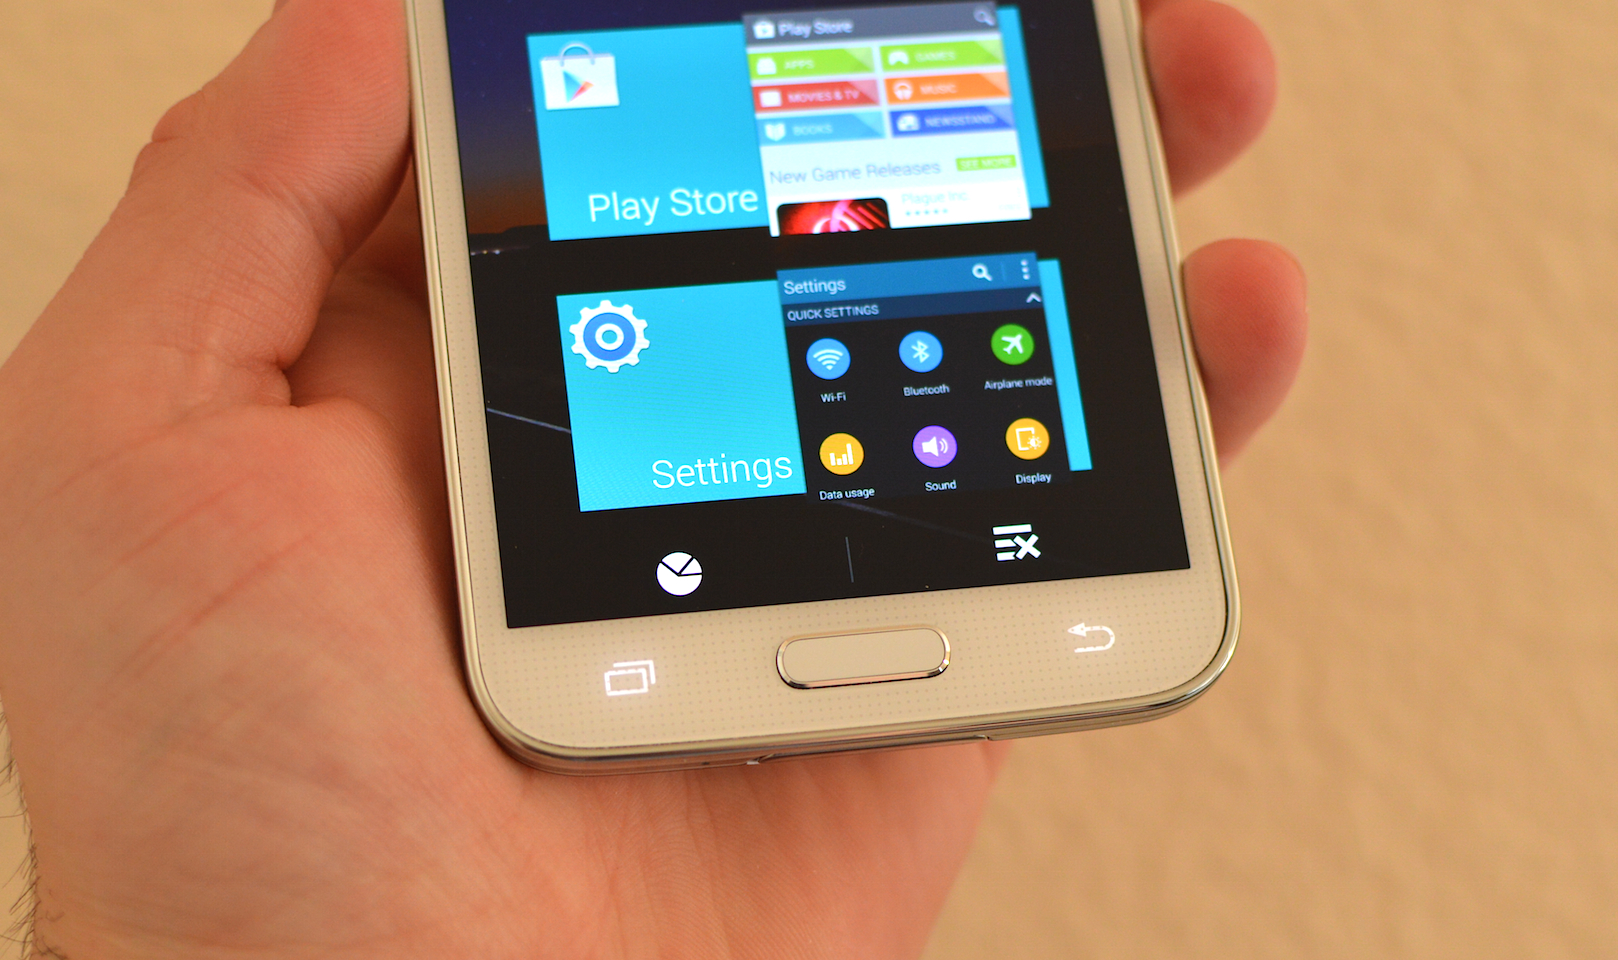 How to Close Apps on the Samsung Galaxy S5